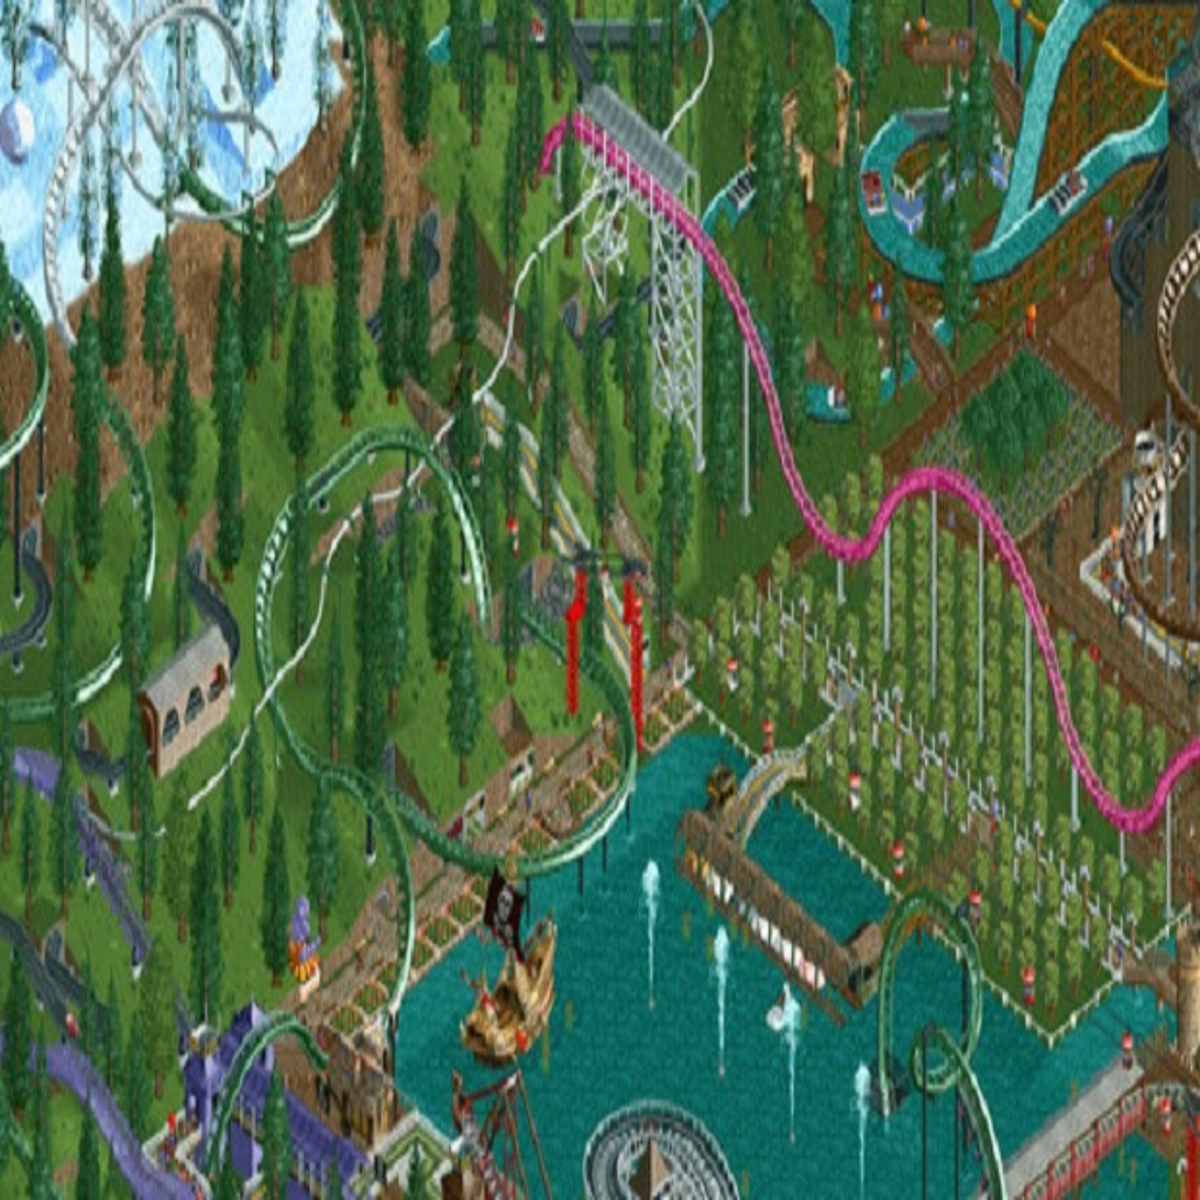 Roller Coaster Tycoon Classic review: Amusement park simulator a